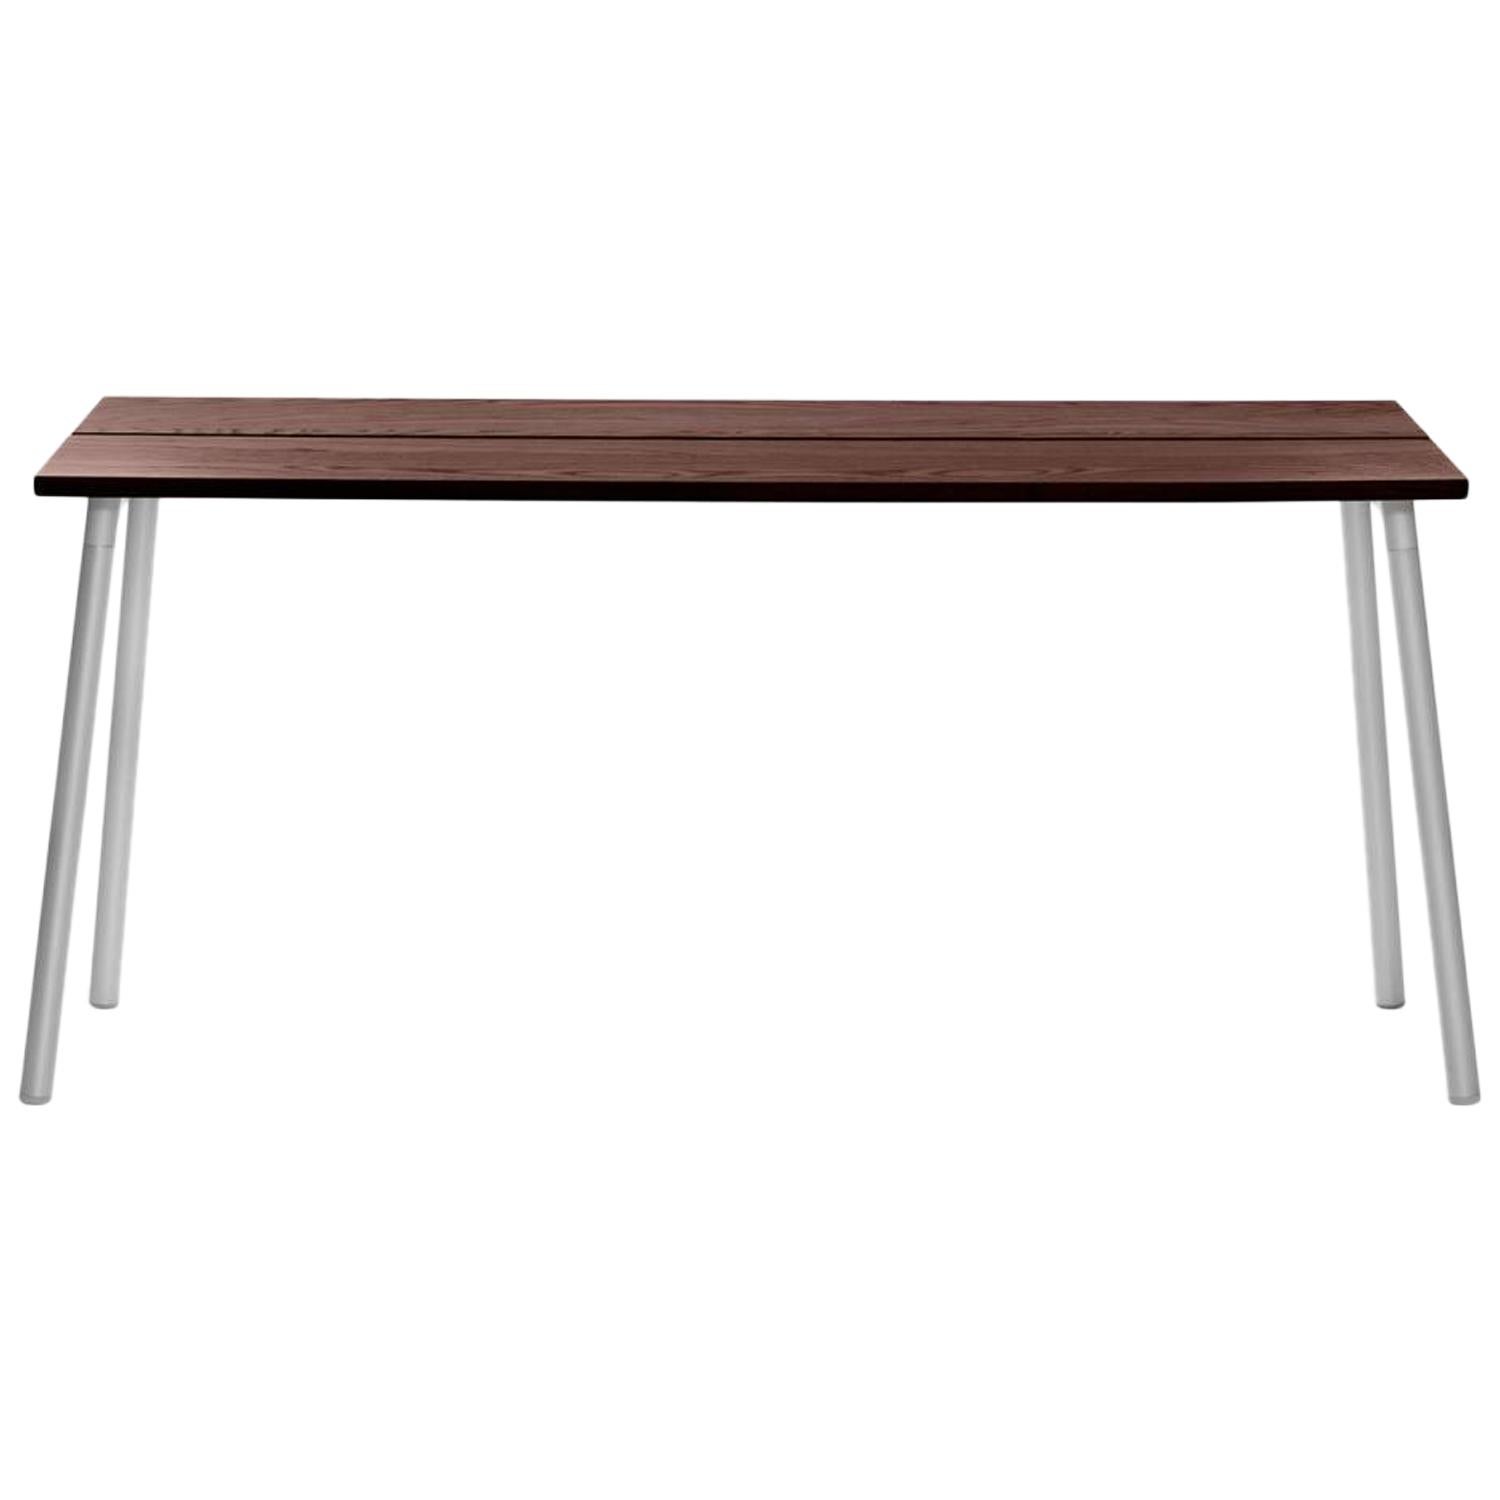 Emeco Run Small Side Table in Aluminum & Walnut by Sam Hecht + Kim Colin For Sale